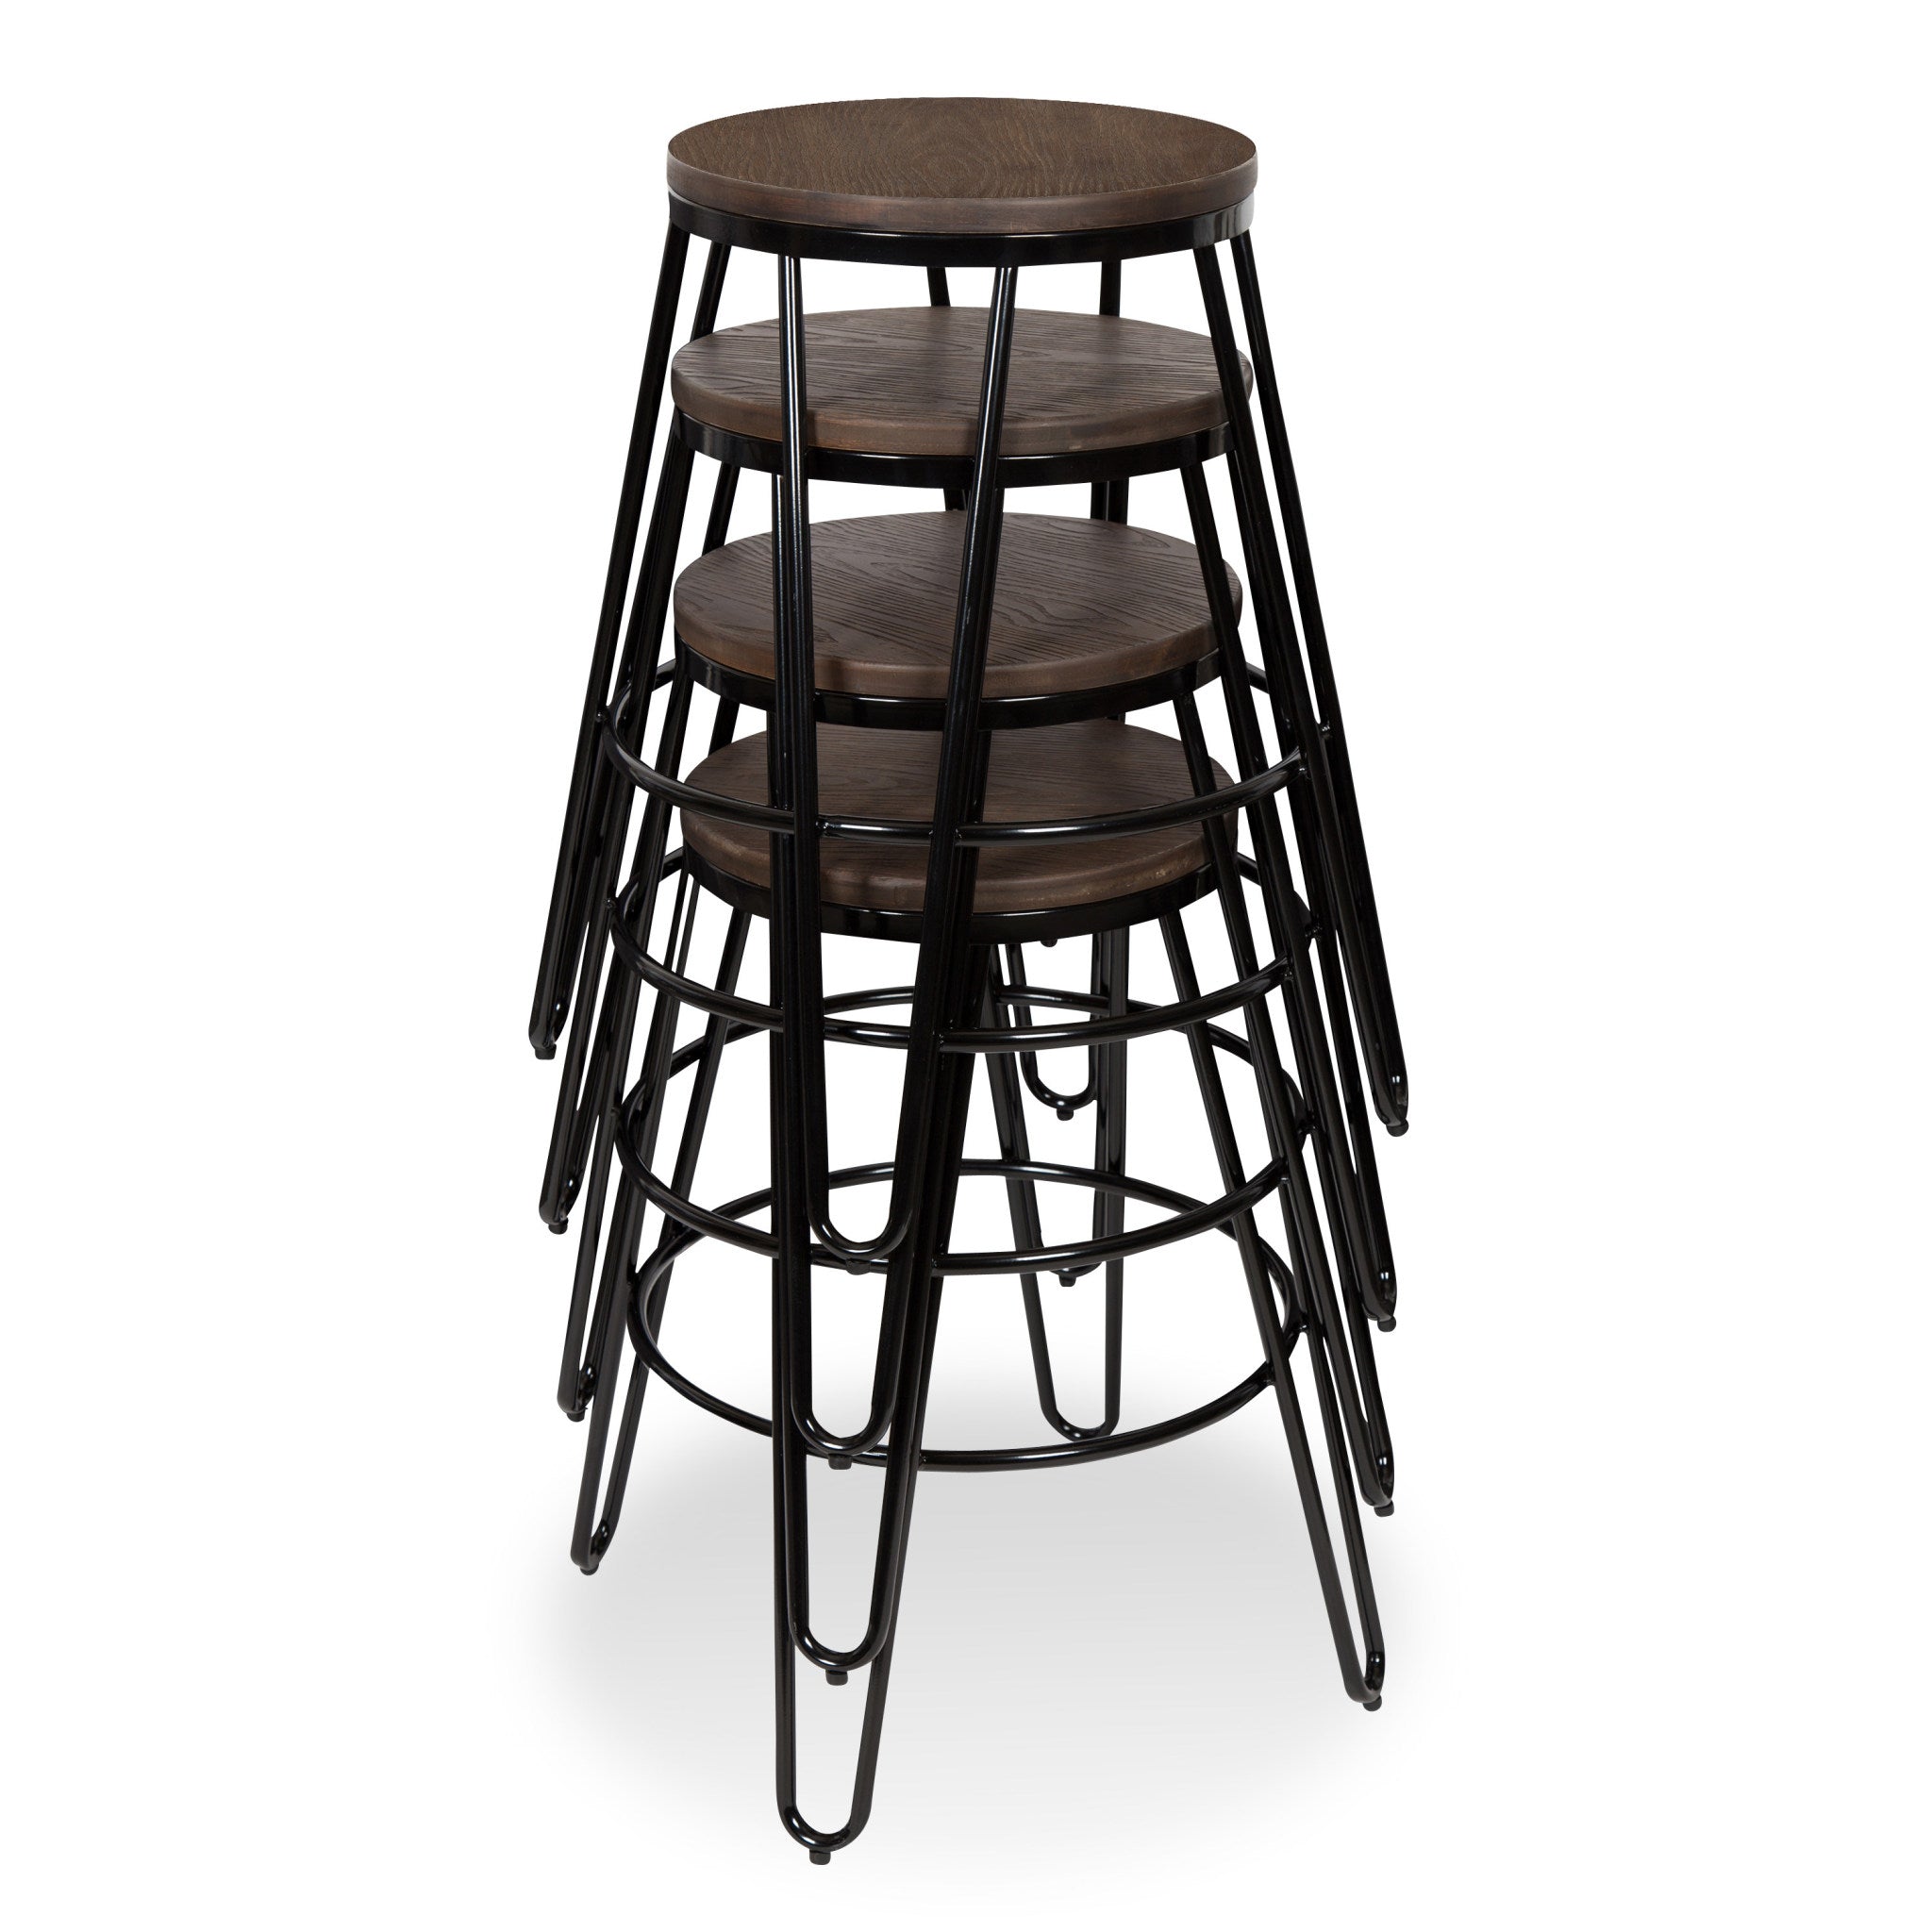 Tully Wood and Metal Bar Stools, 4 Pack